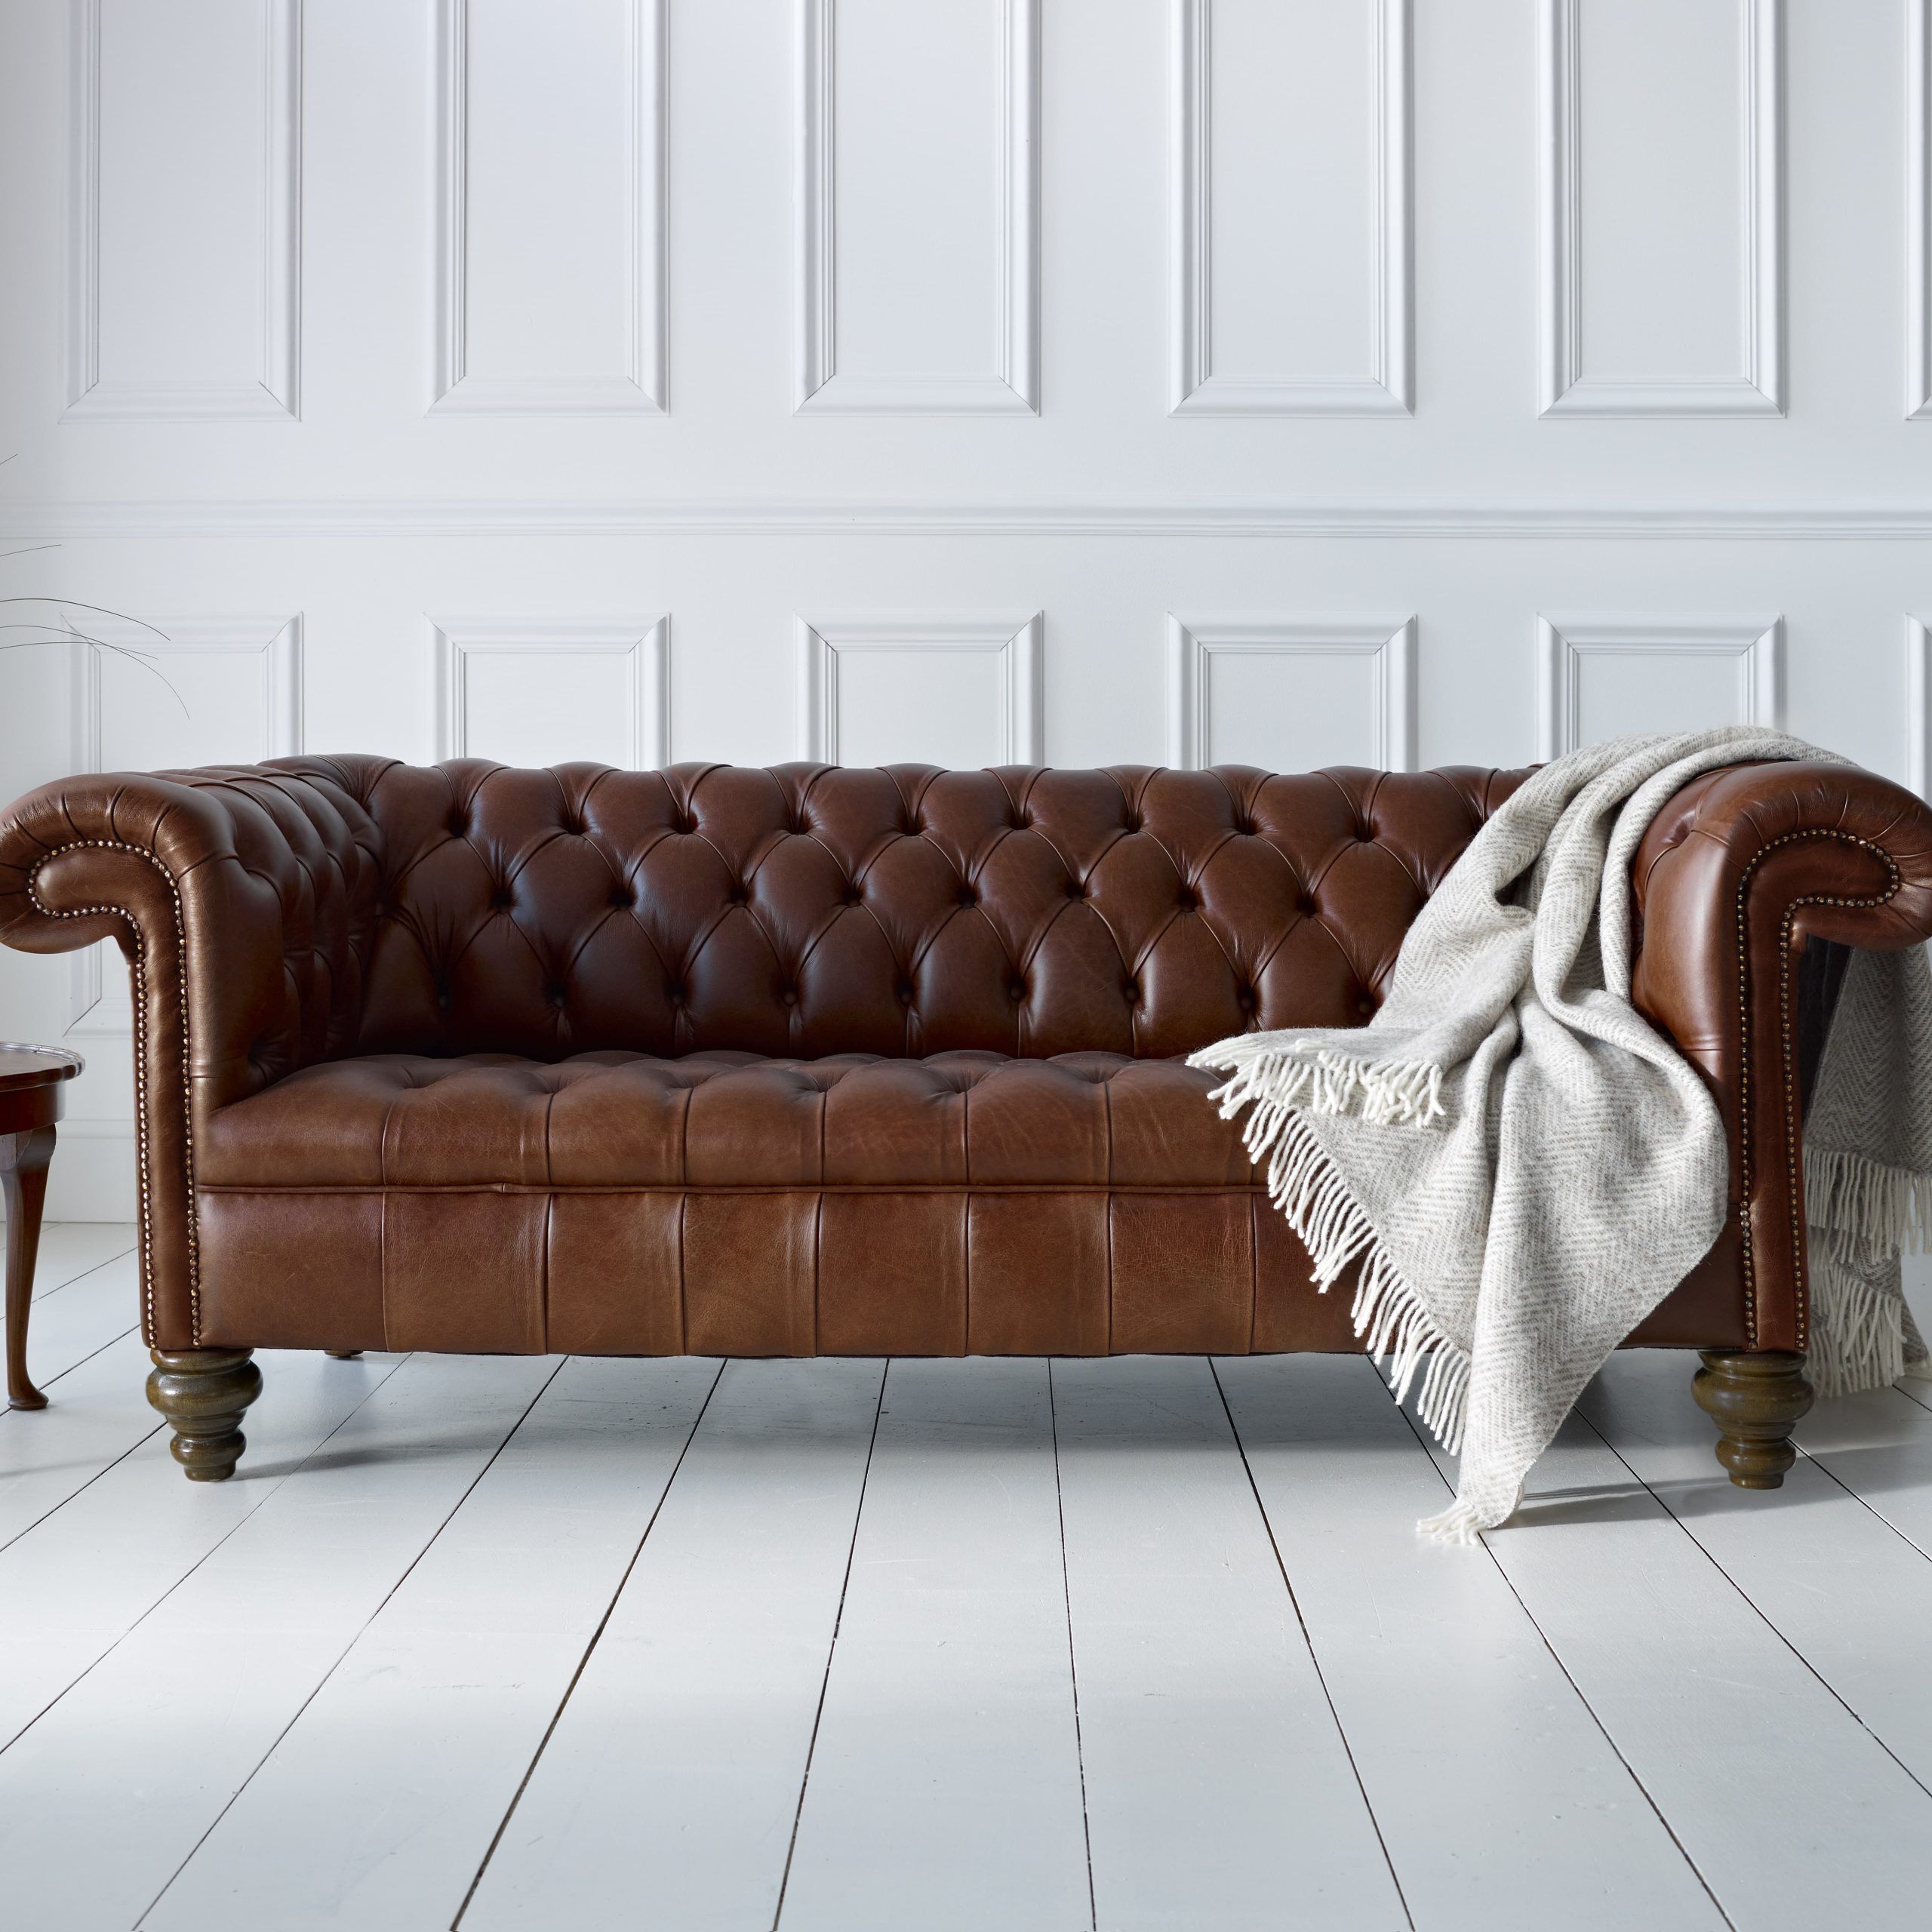 What Makes A Sofa A Chesterfield Sofa? – The Chesterfield Company Within Chesterfield Sofas (Gallery 3 of 21)